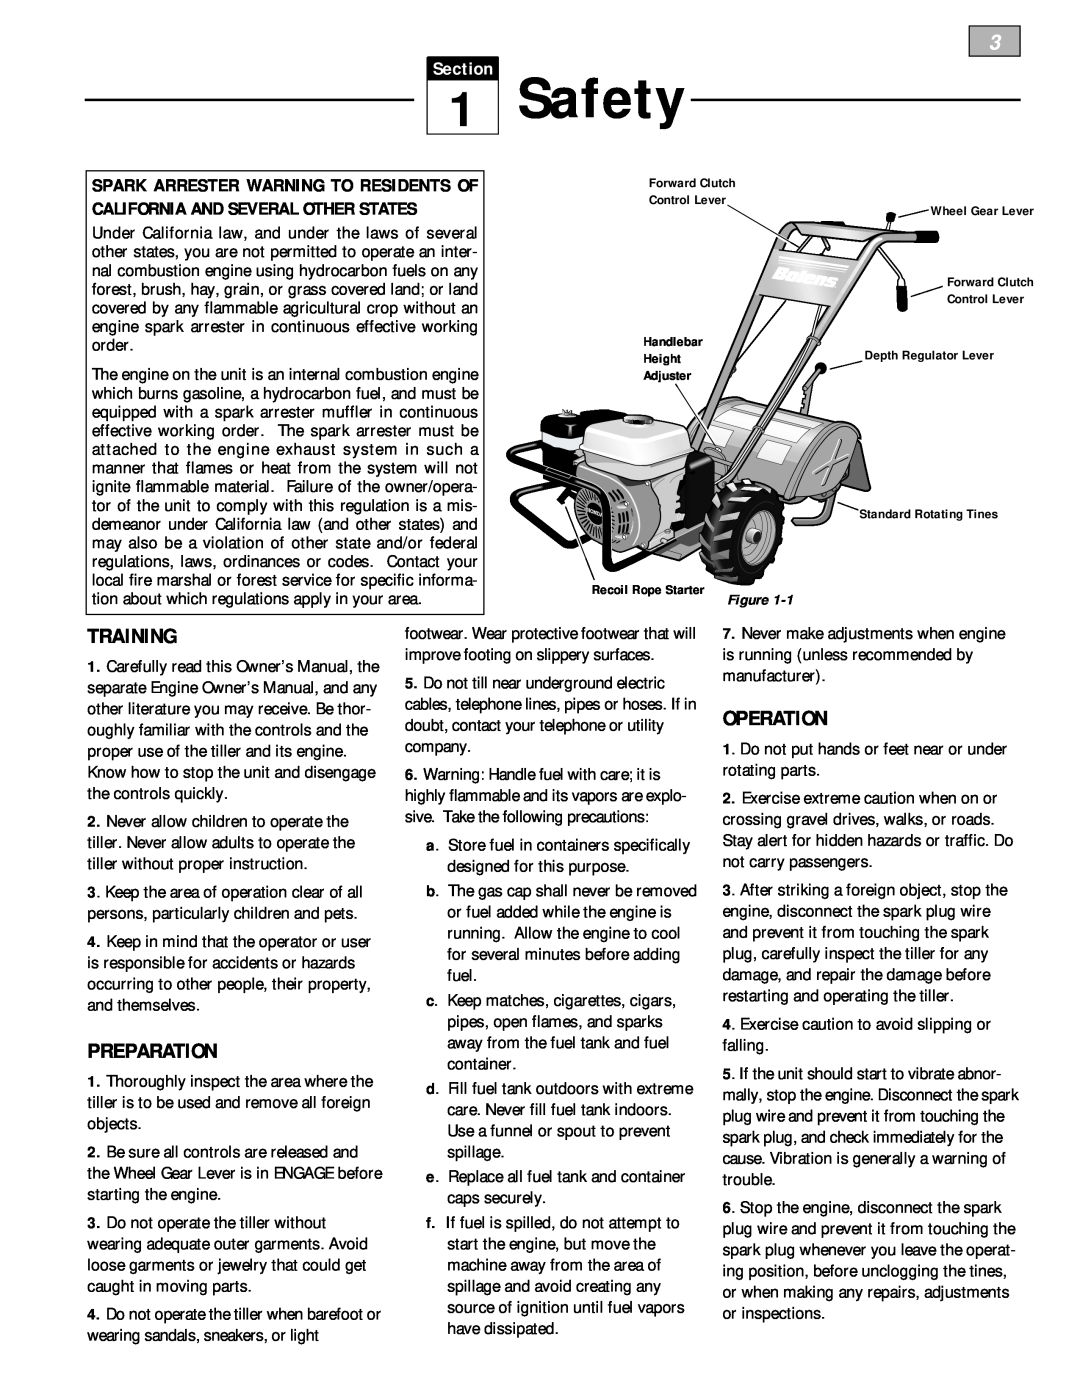 Bolens 12226 owner manual Safety, Training, Preparation, Operation, Section 